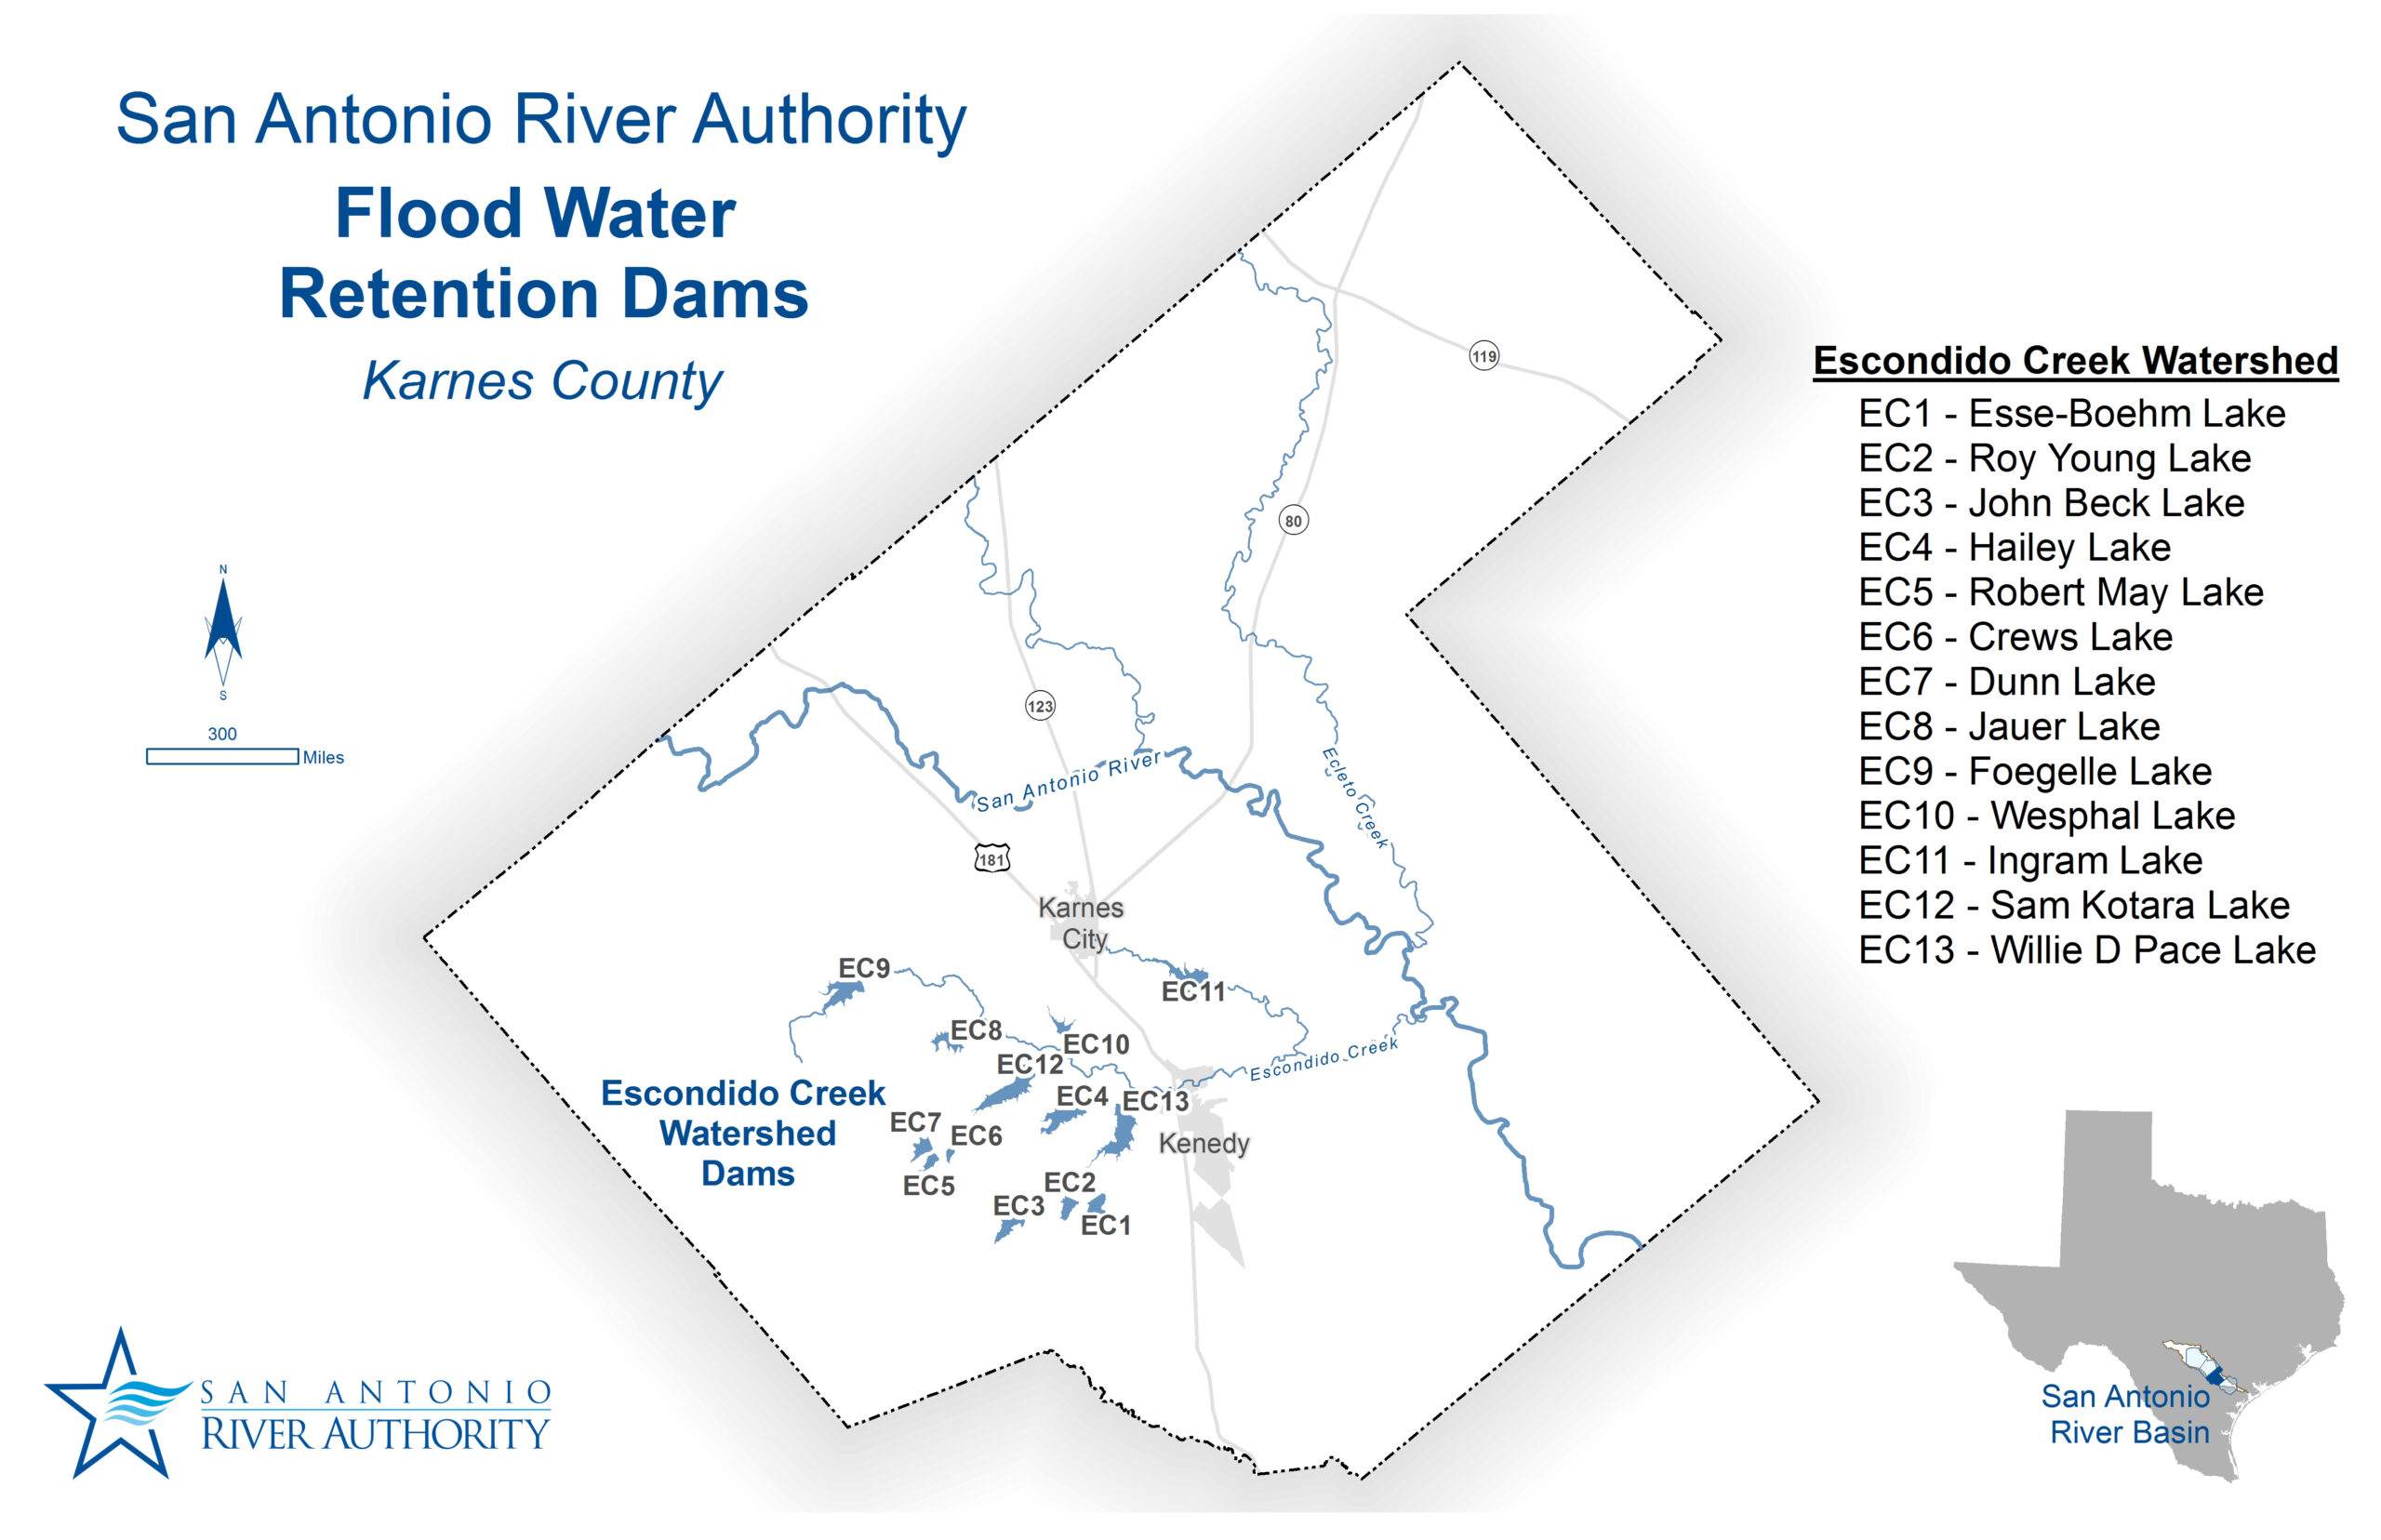 Dams Reference Karnes County 